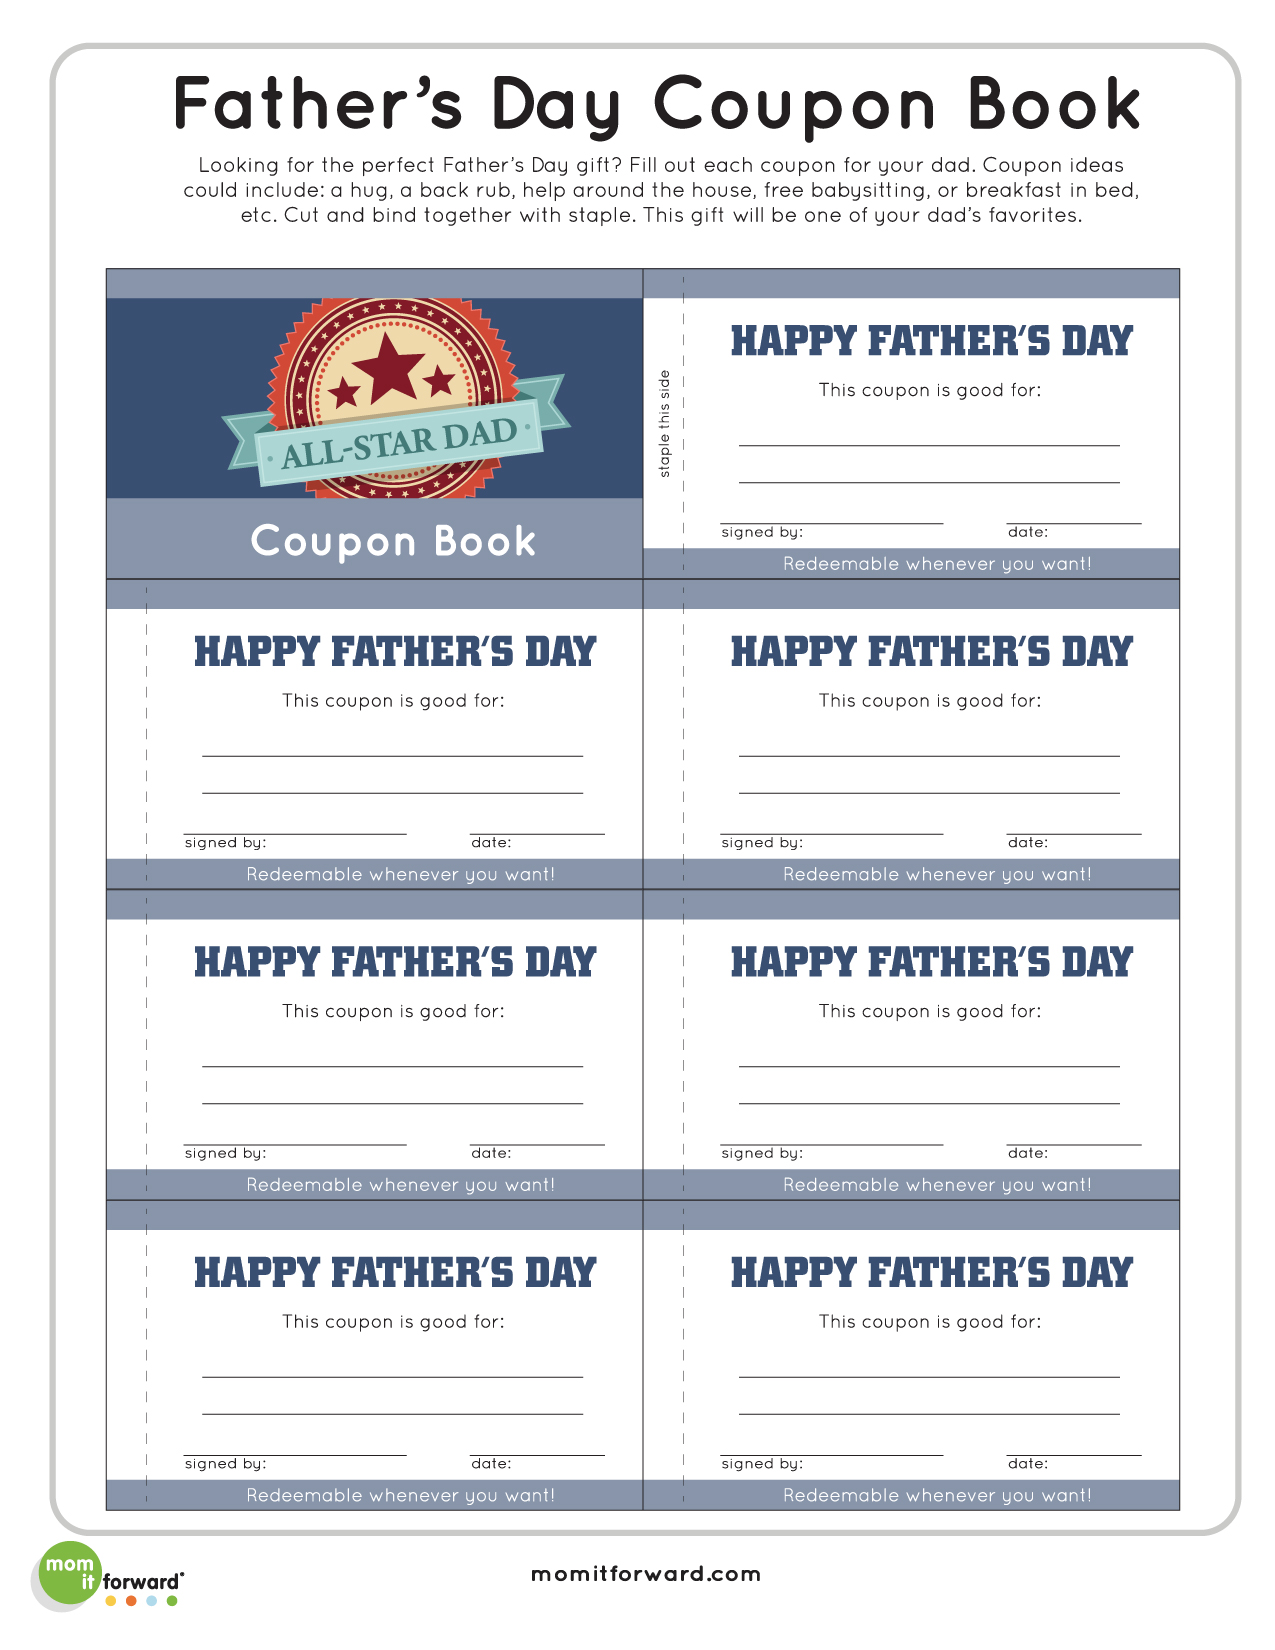 Father s Day Coupon Book PrintableMom it Forward